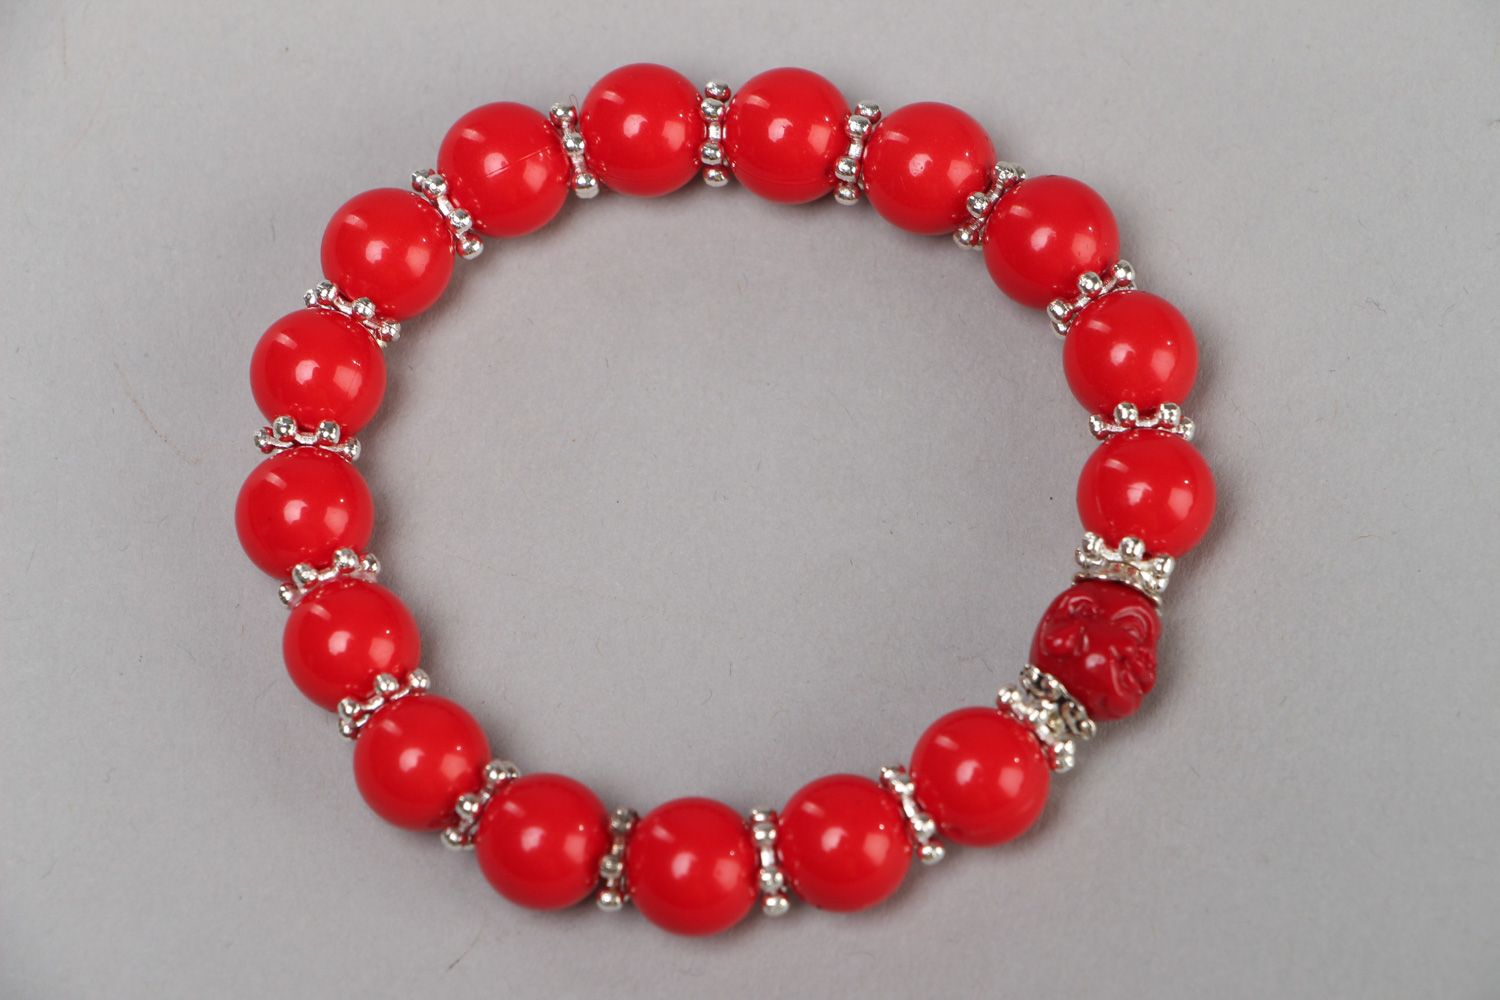 Handmade laconic stretch wrist bracelet with plastic beads of red color for women photo 2